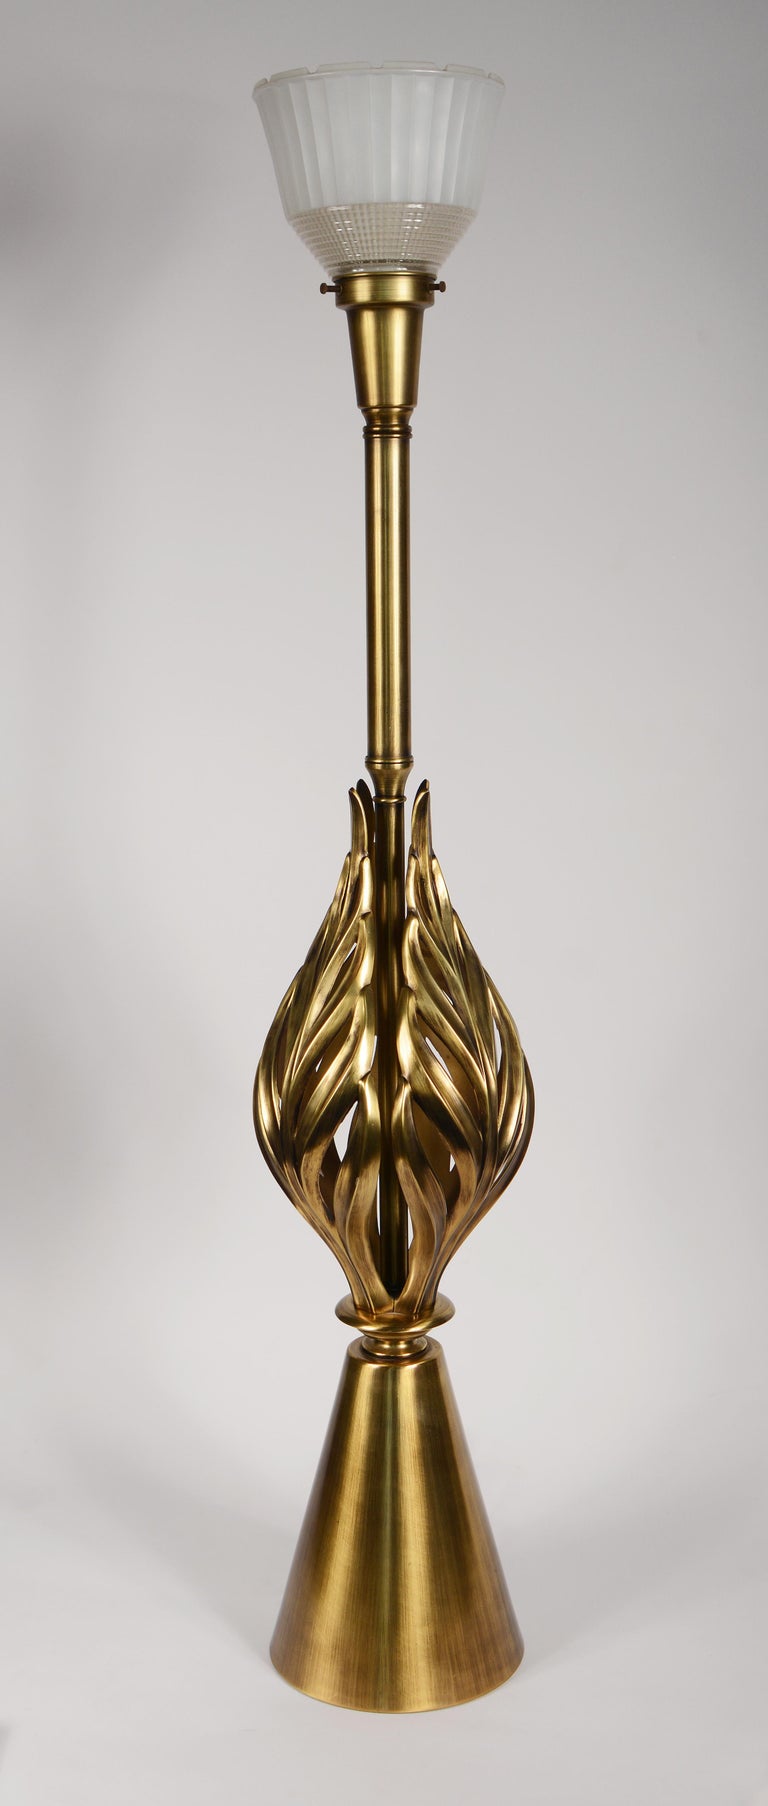 Brass table lamp with stylized acanthus or philodendron leaves by Rembrandt Lamps. This lamp has a three-way switch at the socket and a simple on off switch on the base. The original shade dropped down almost to the top of the leaves making the